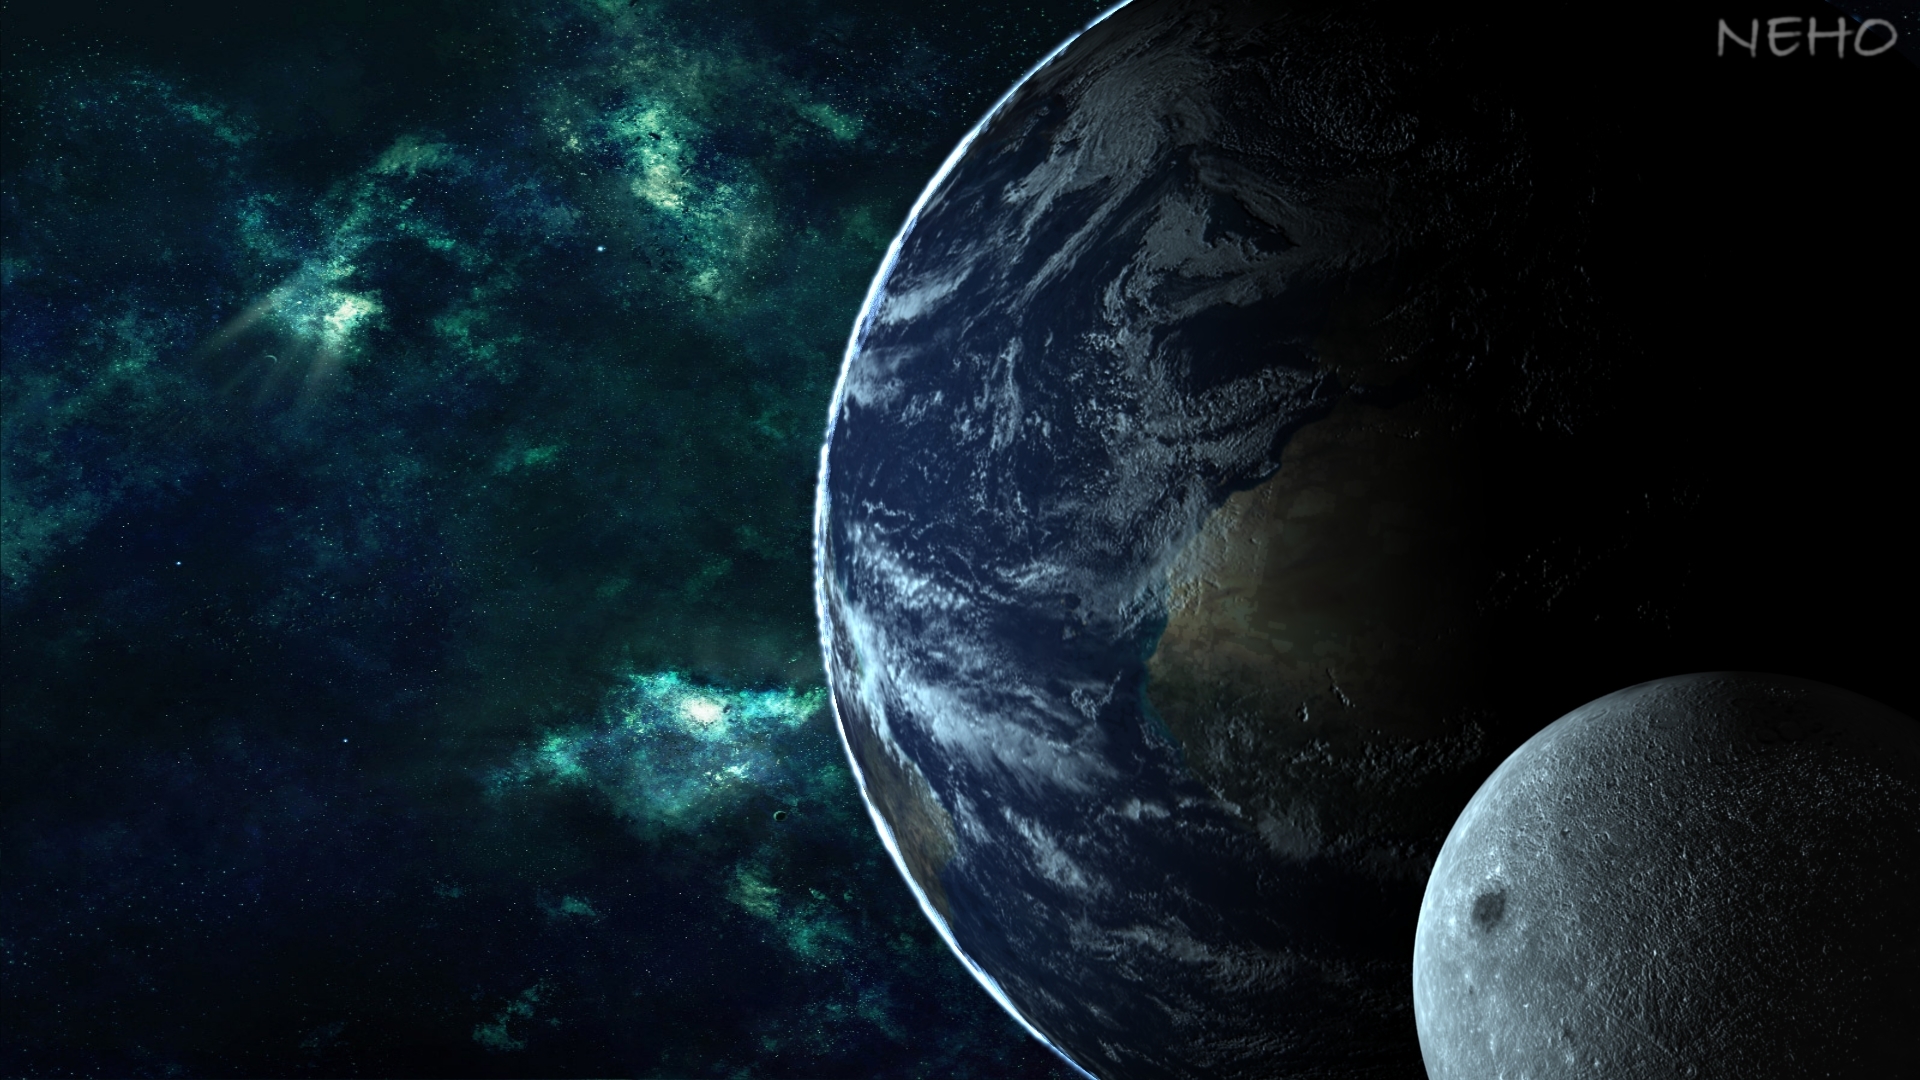 Gallery Moon Wallpaper Unsere Earth